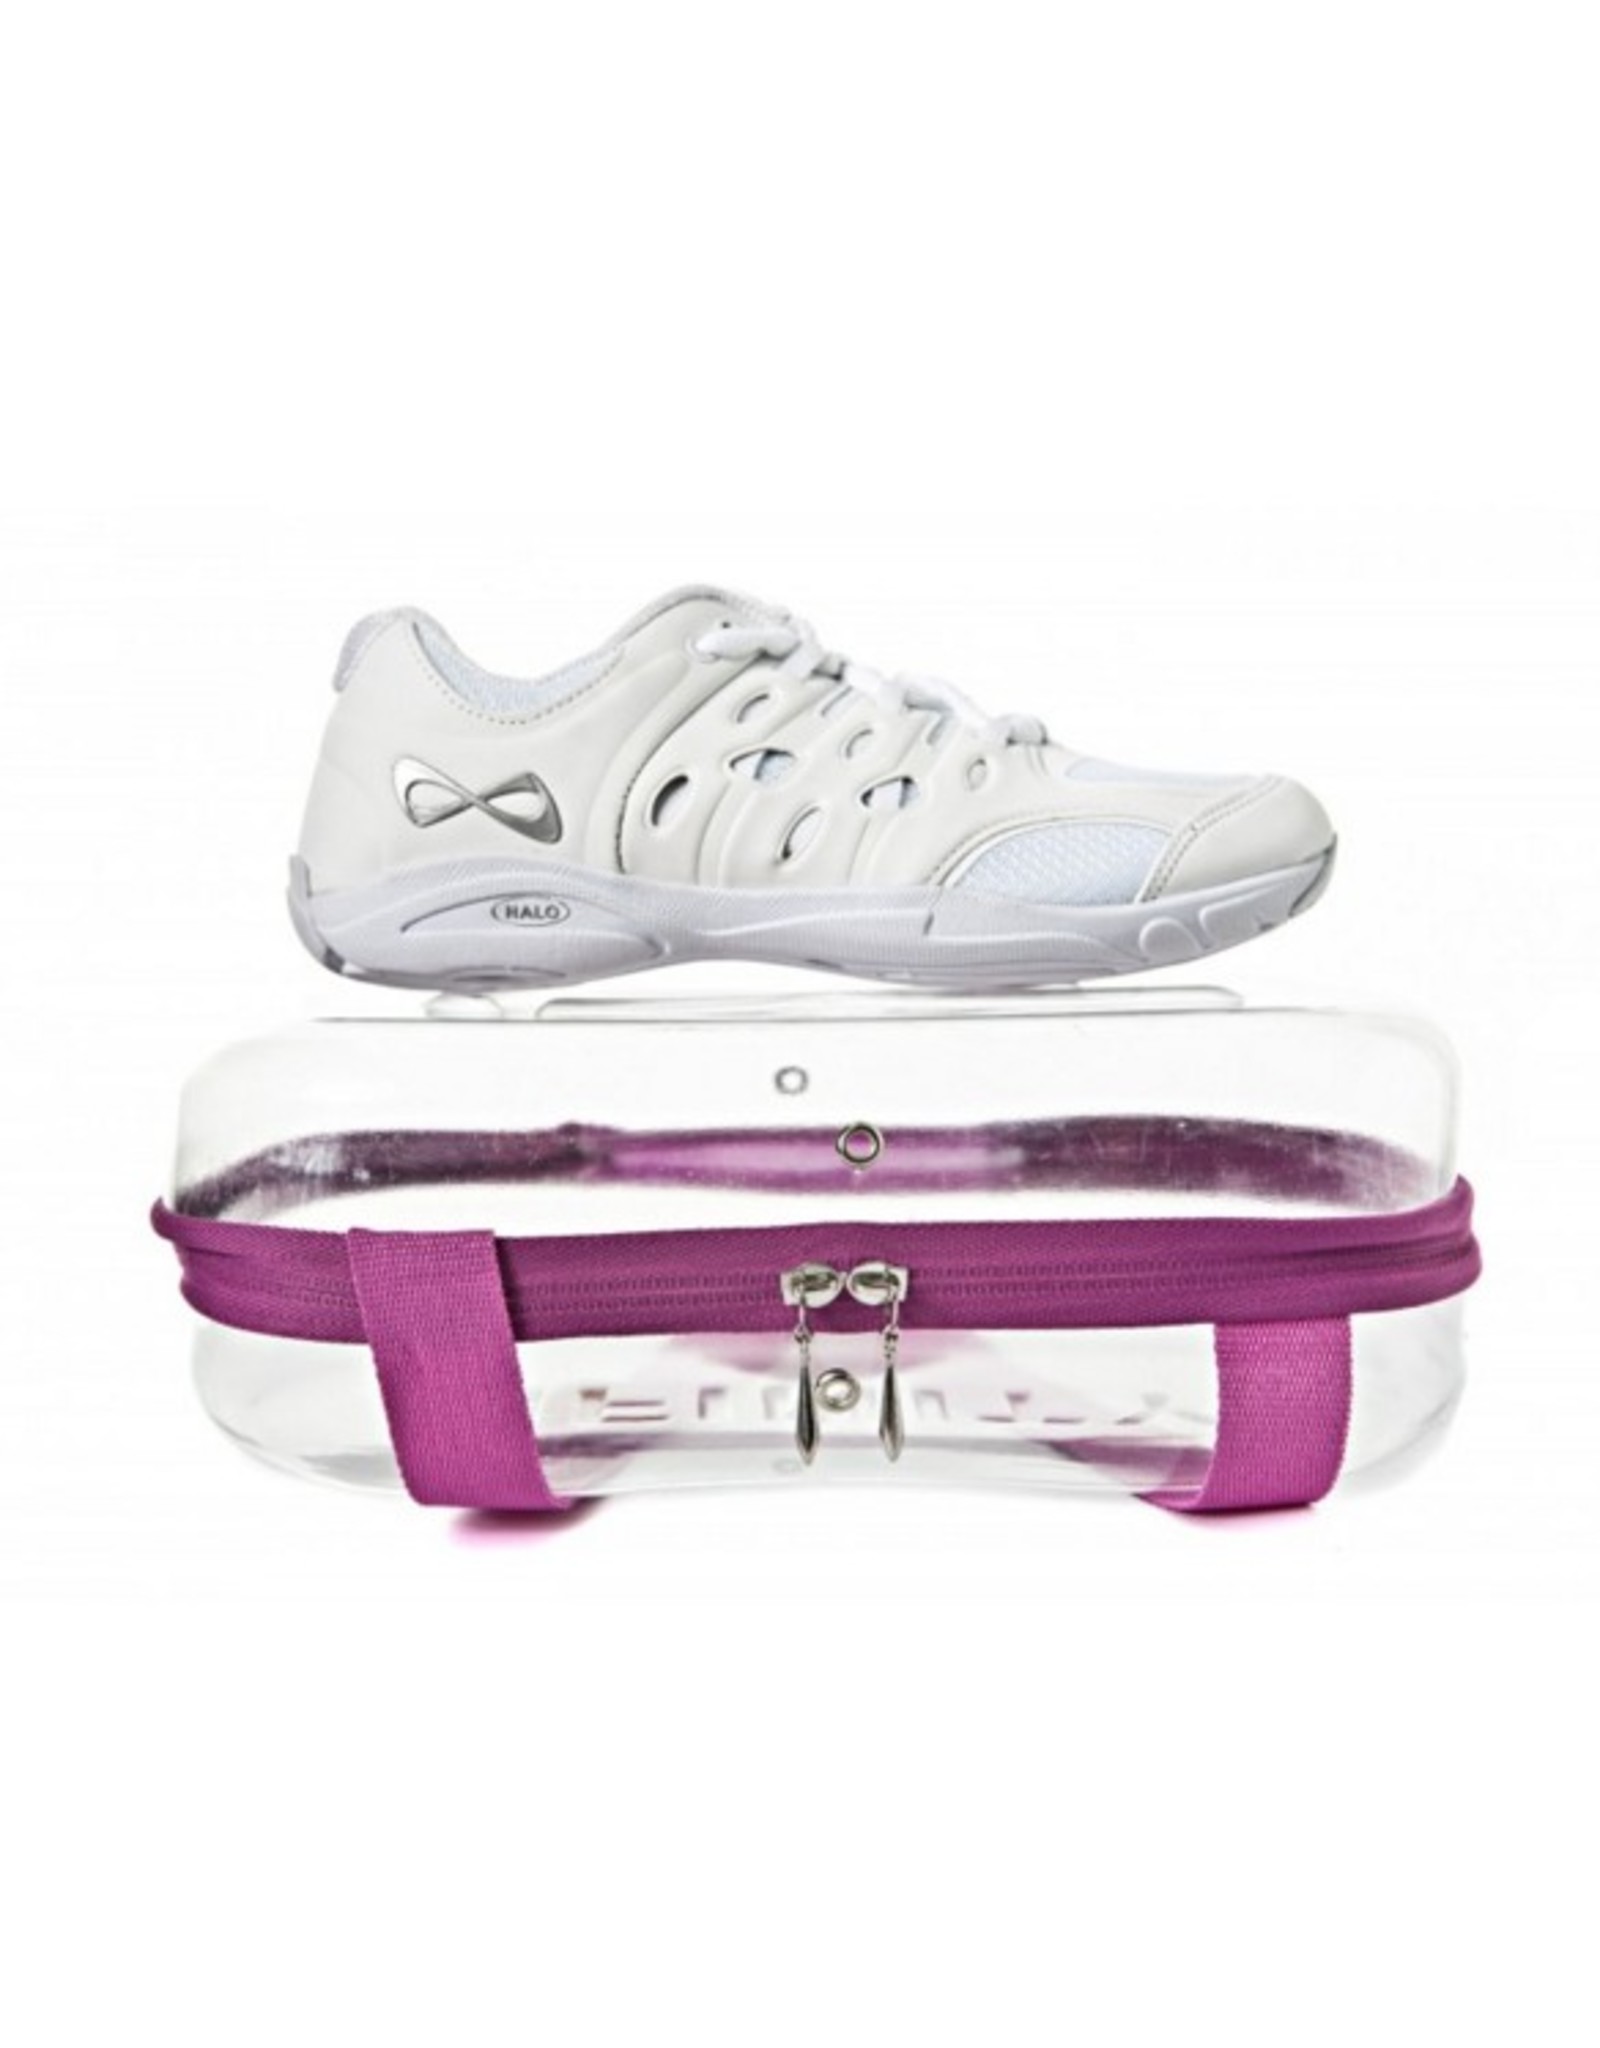 nfinity cheer shoes sale